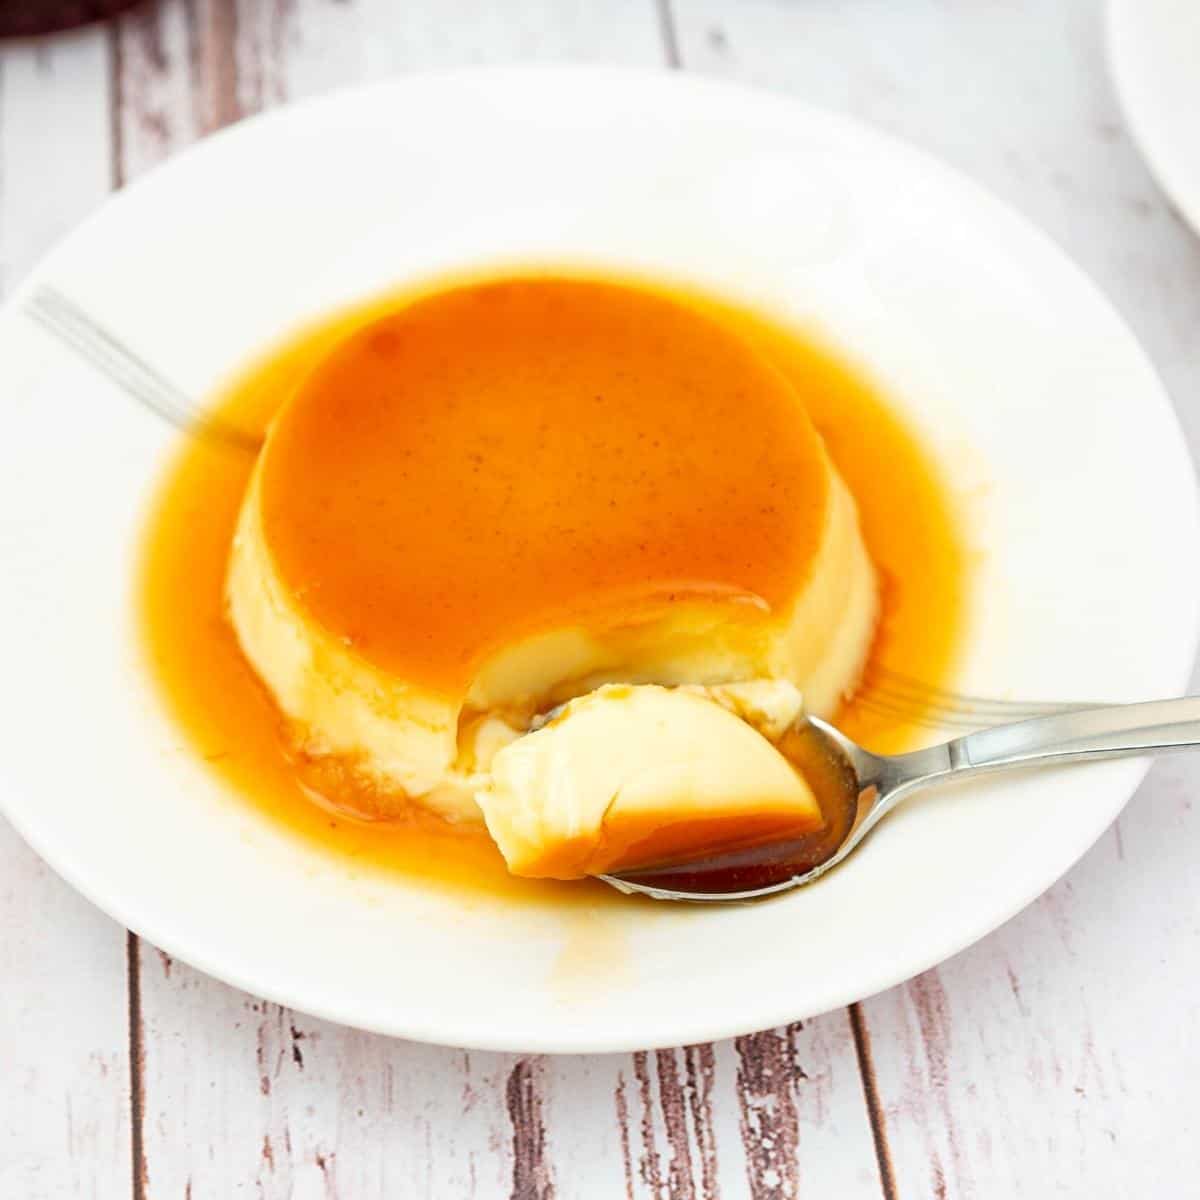 A spoon and plate with flan.